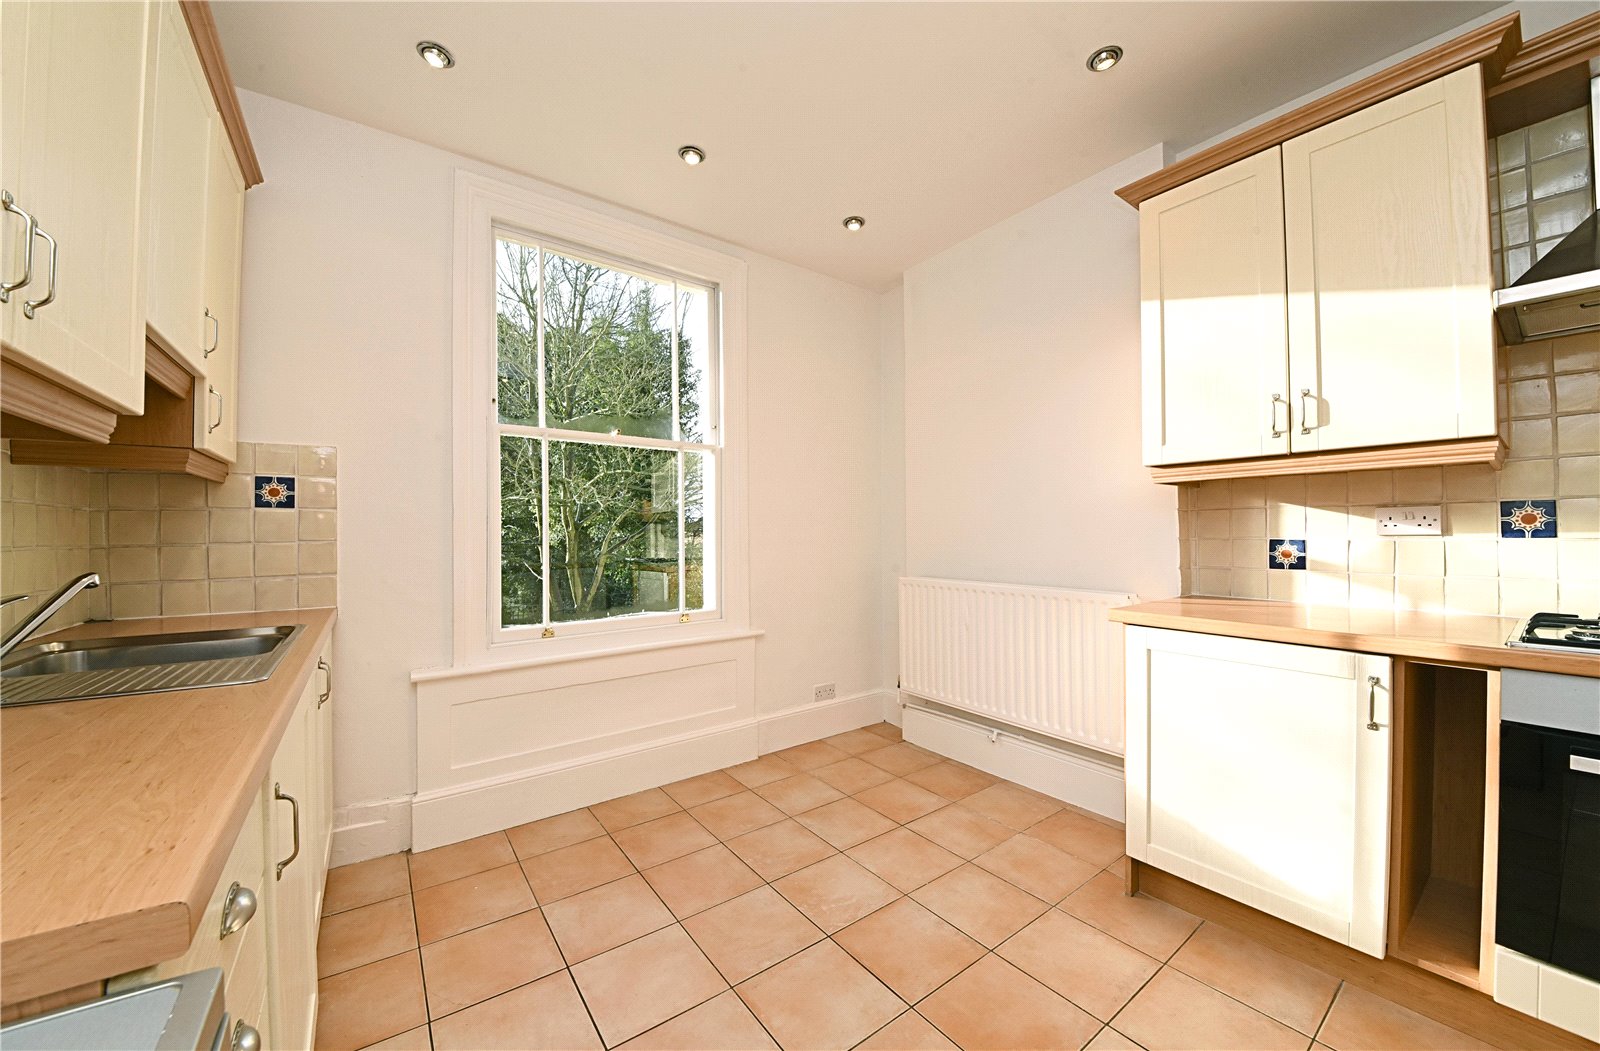 3 bed apartment to rent in Wood Street, High Barnet  - Property Image 3